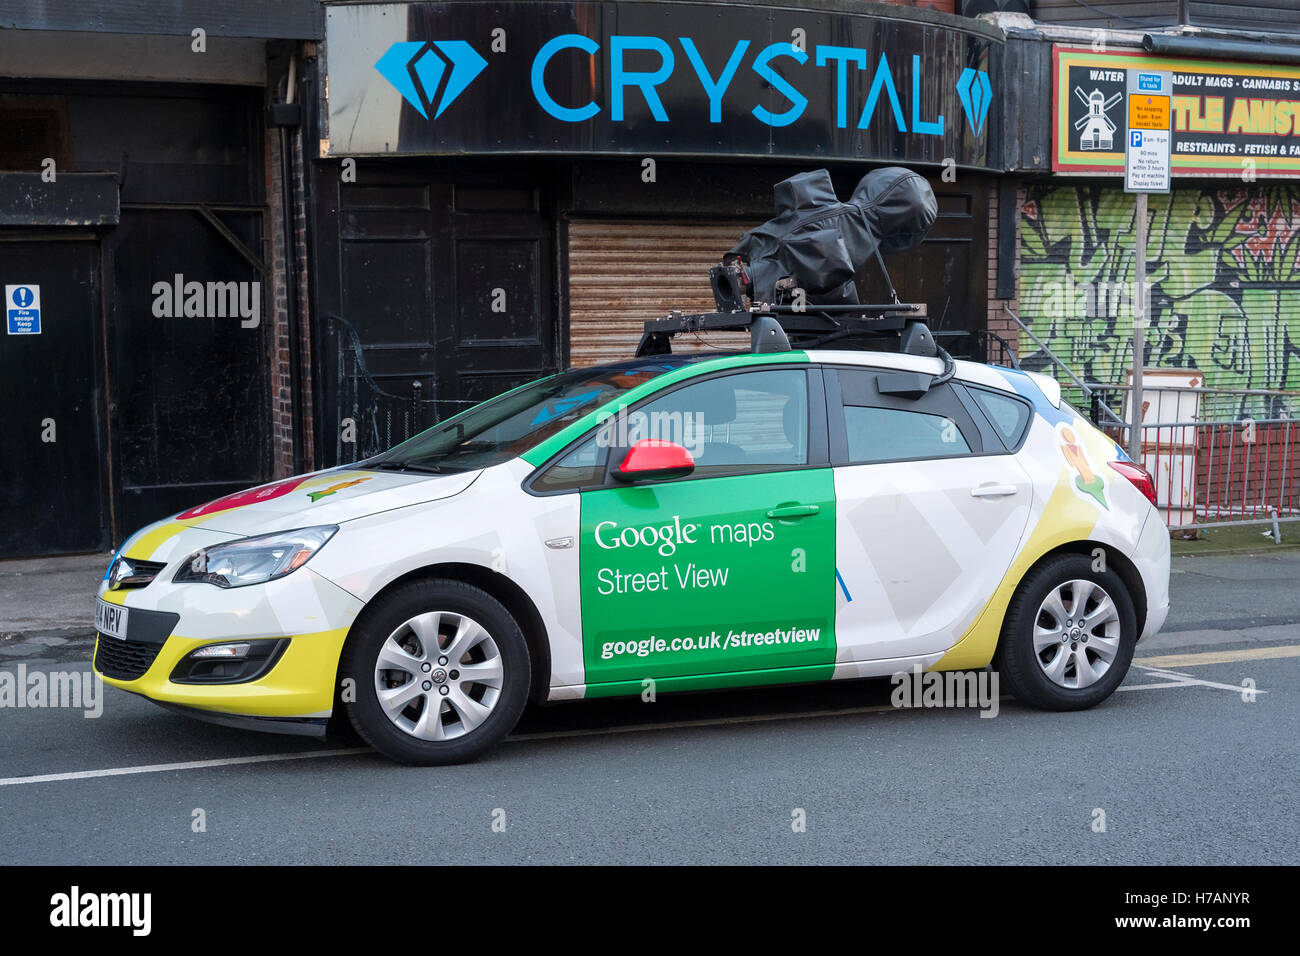 A Google Street View vehicle used for mapping streets throughout the world, Blackpool, Lancashire, UK. Stock Photo